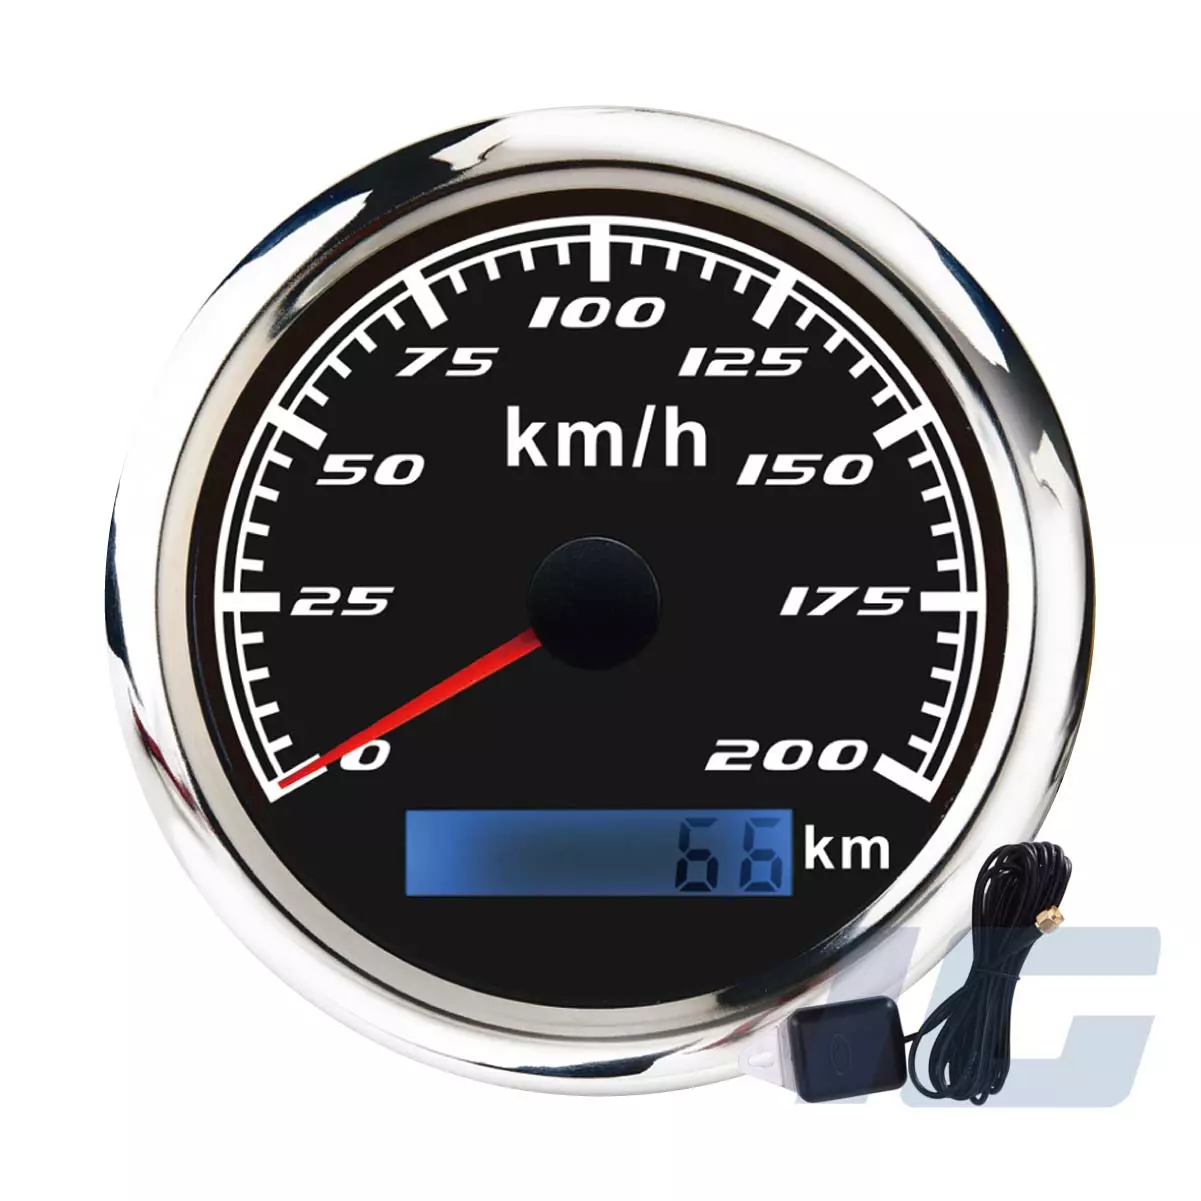 W Pro Series 85mm Black Face Aftermarket Marine Gauge - 200 KMH Speedometer with Odometer & GPS Sensor for Pontoon Boat, Yacht, Outboard